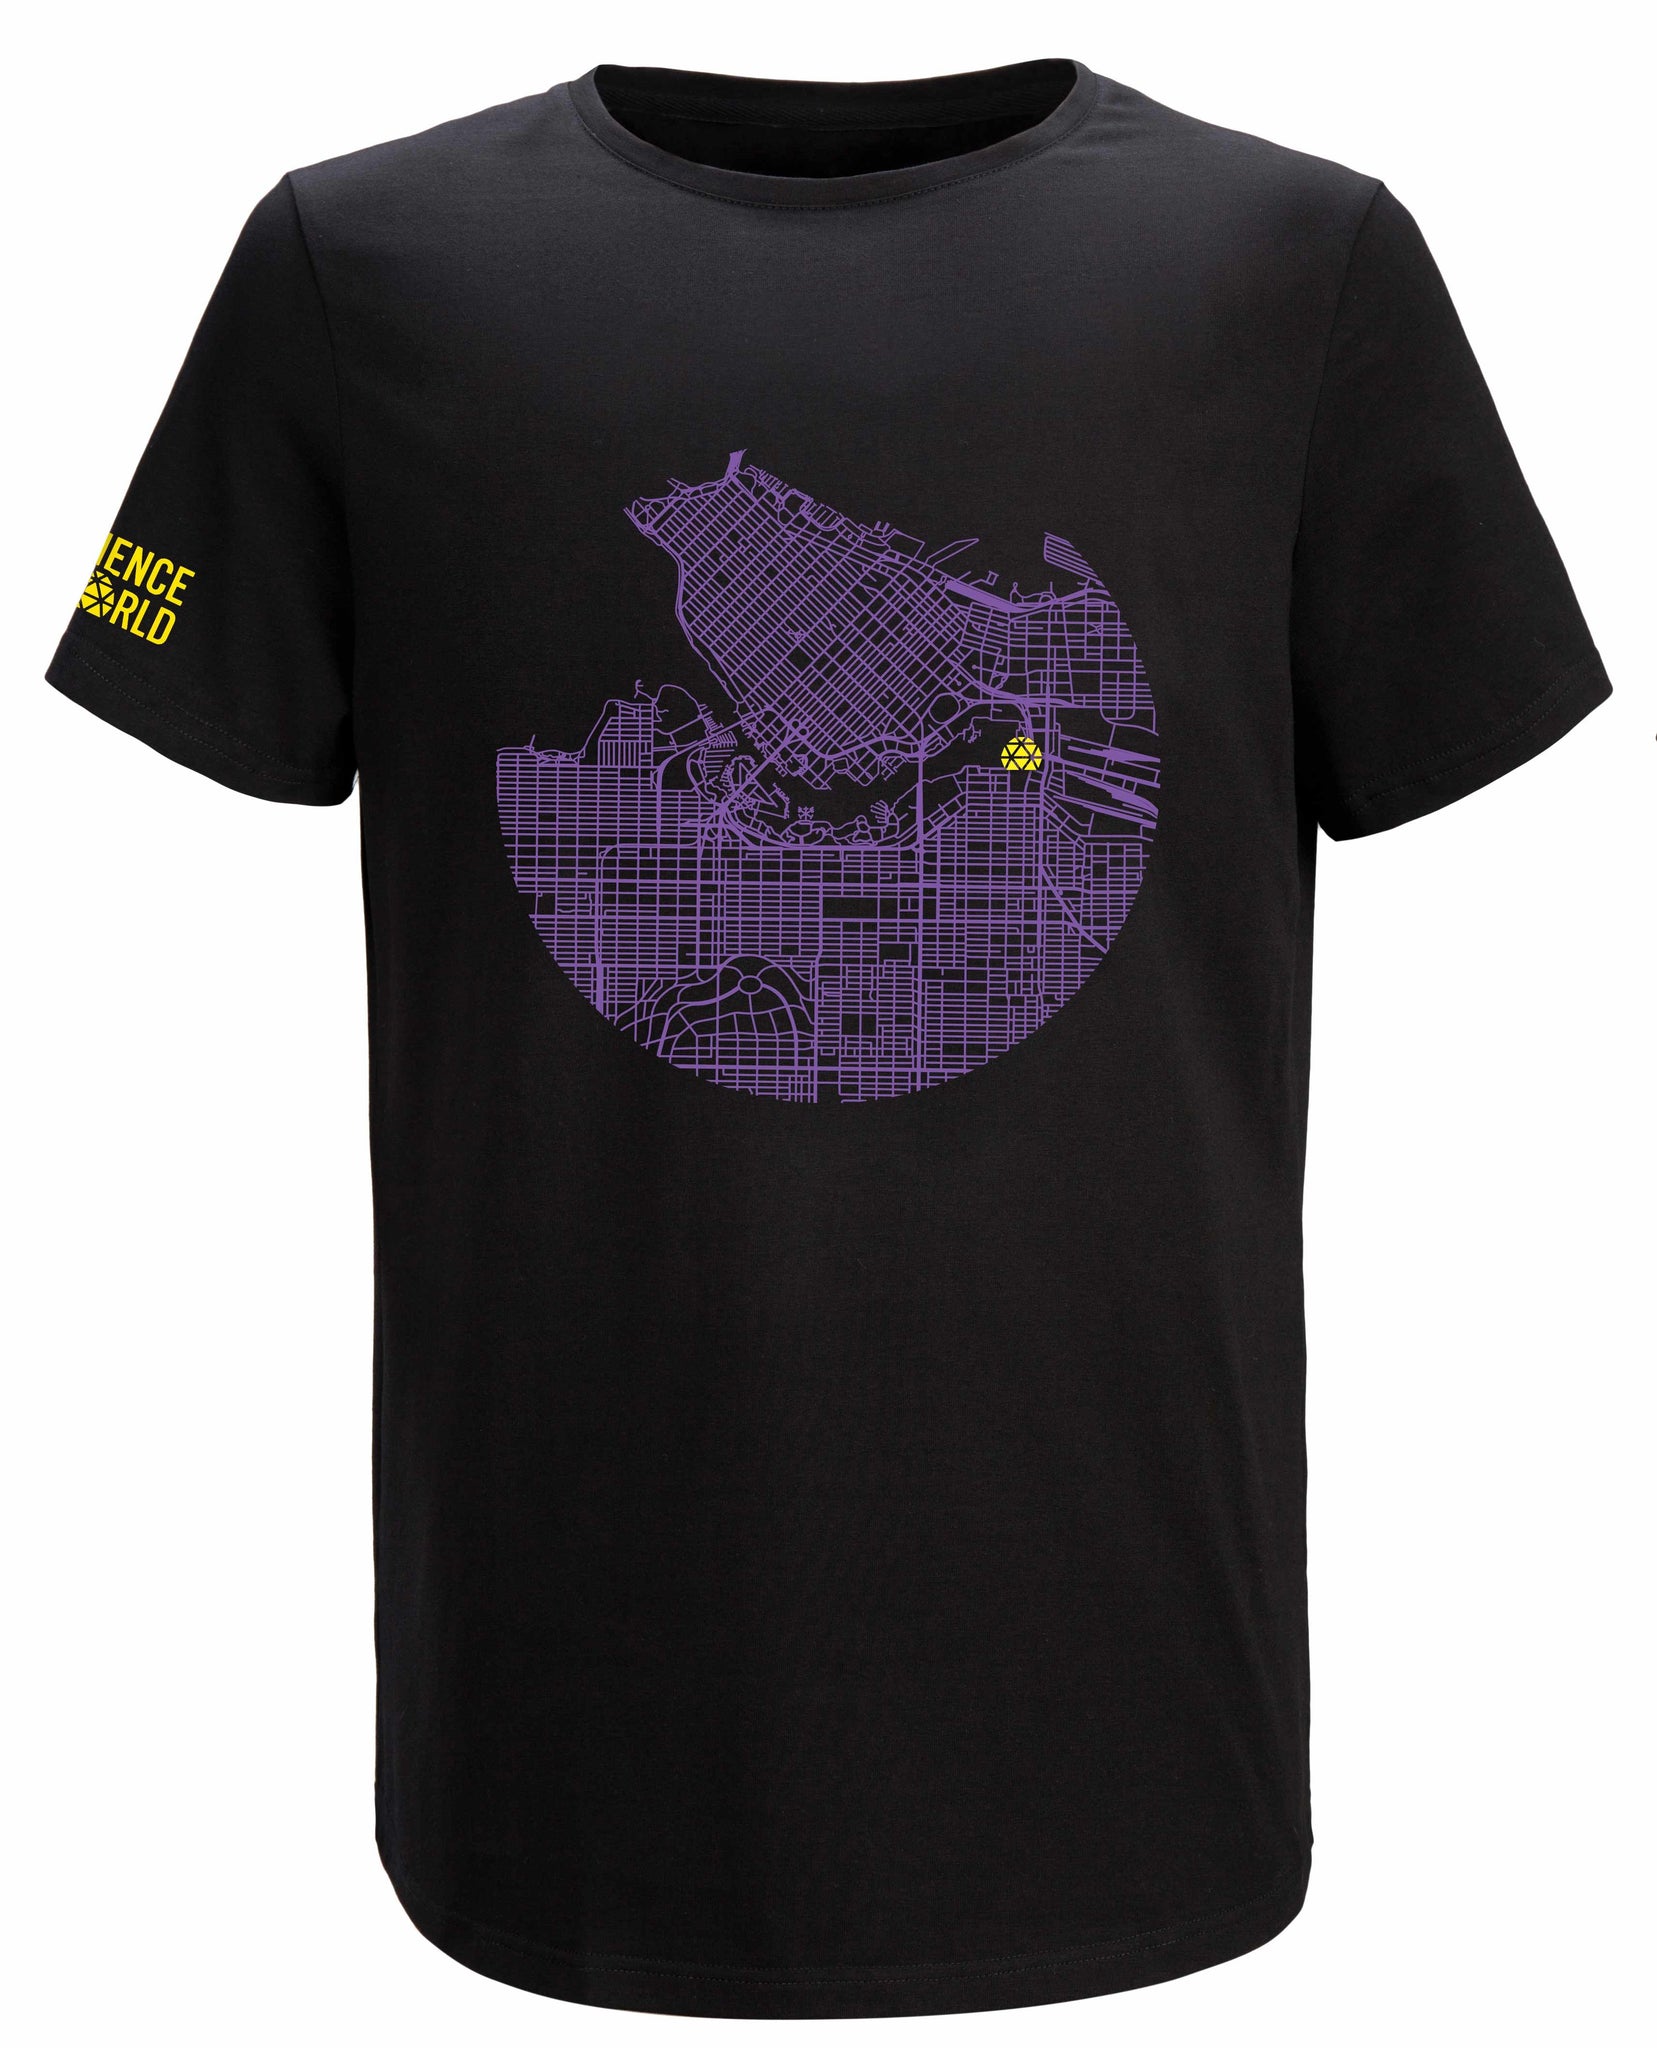 MAP OF VANCOUVER ADULT T-SHIRT